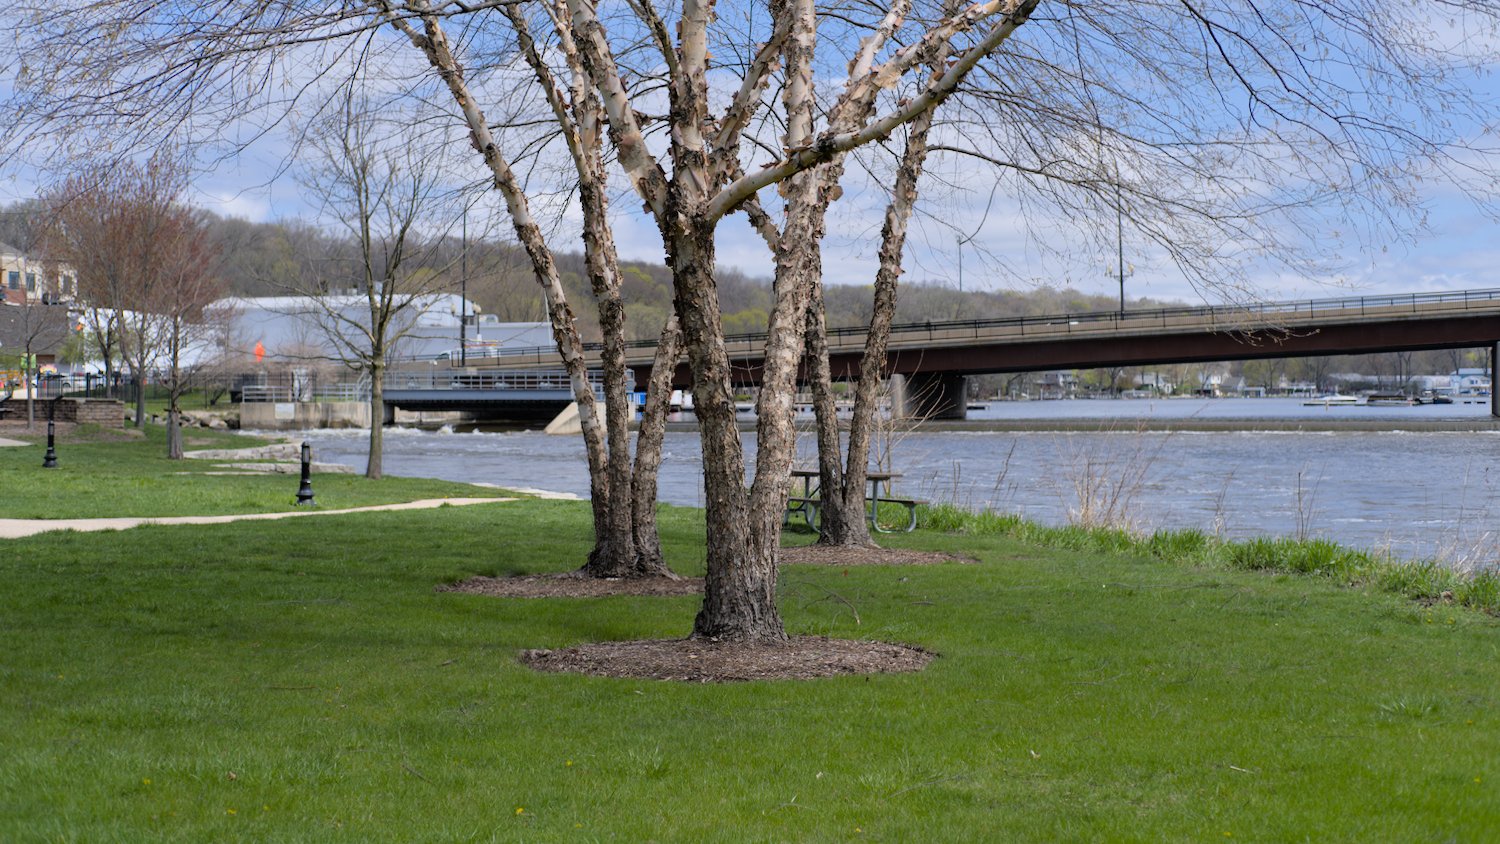 Greenspace and walking paths along the river.